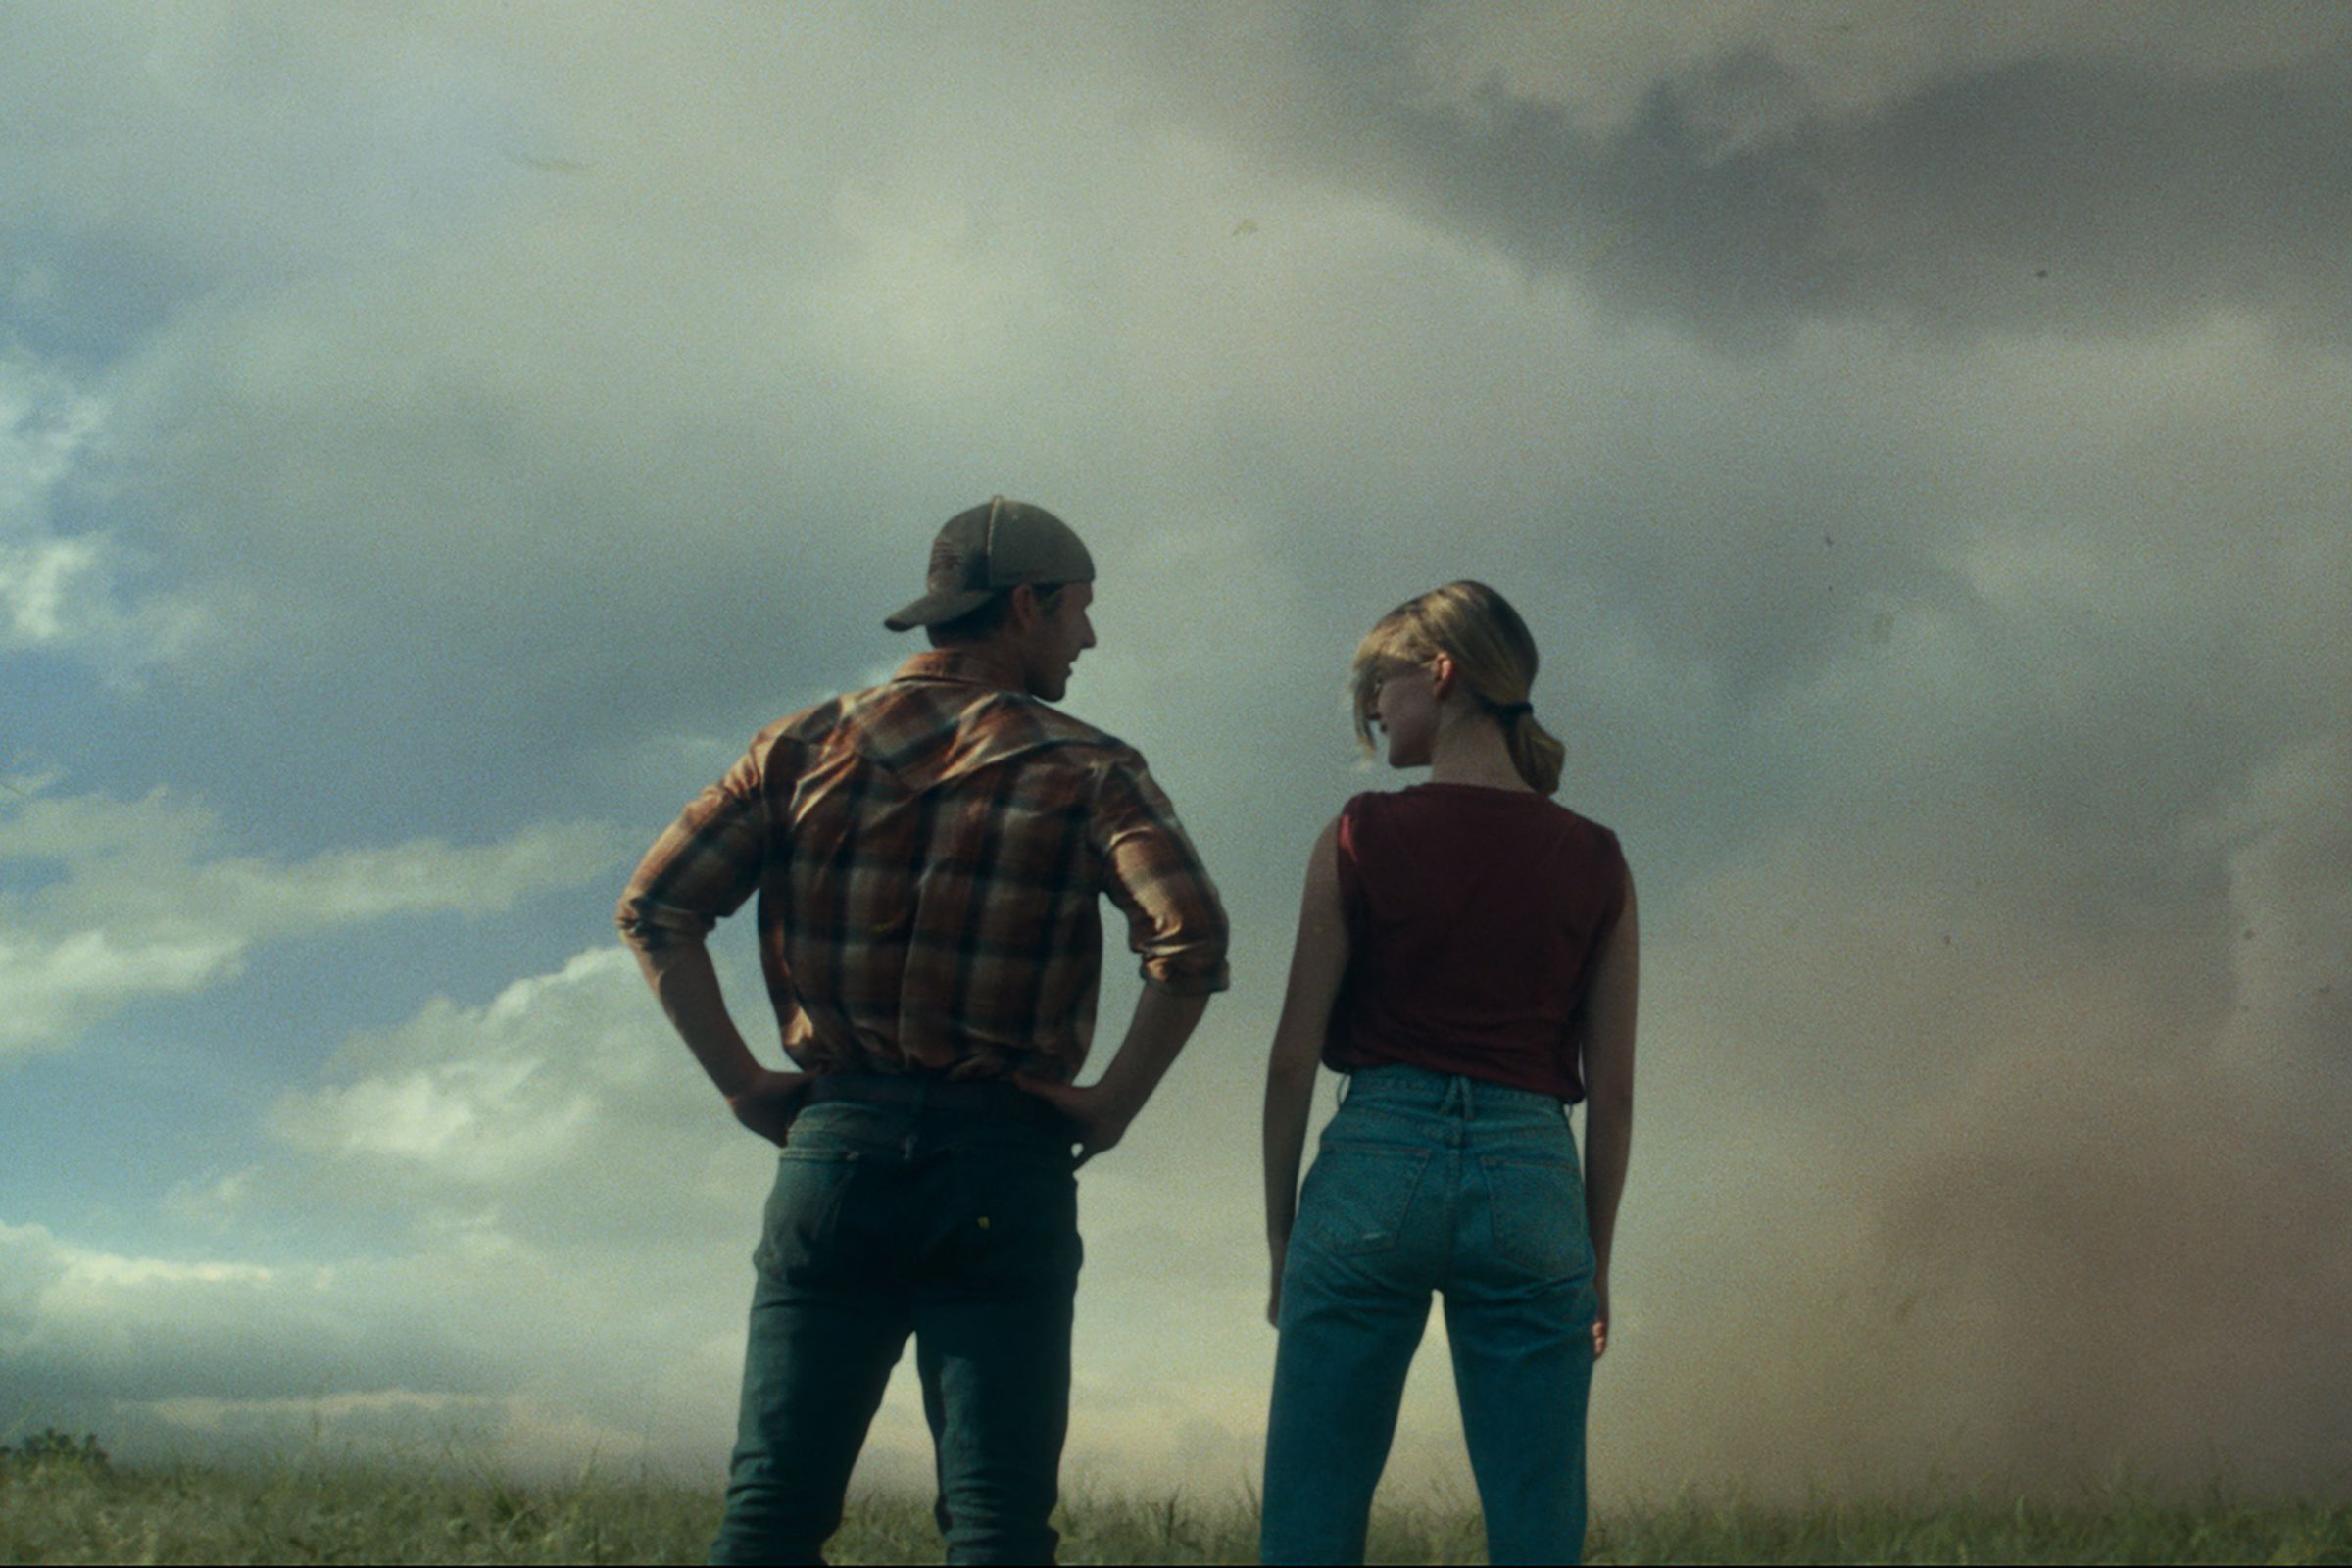 A woman and man standing side by side in a wide open field as they face a massive tornado twisting in the distance.